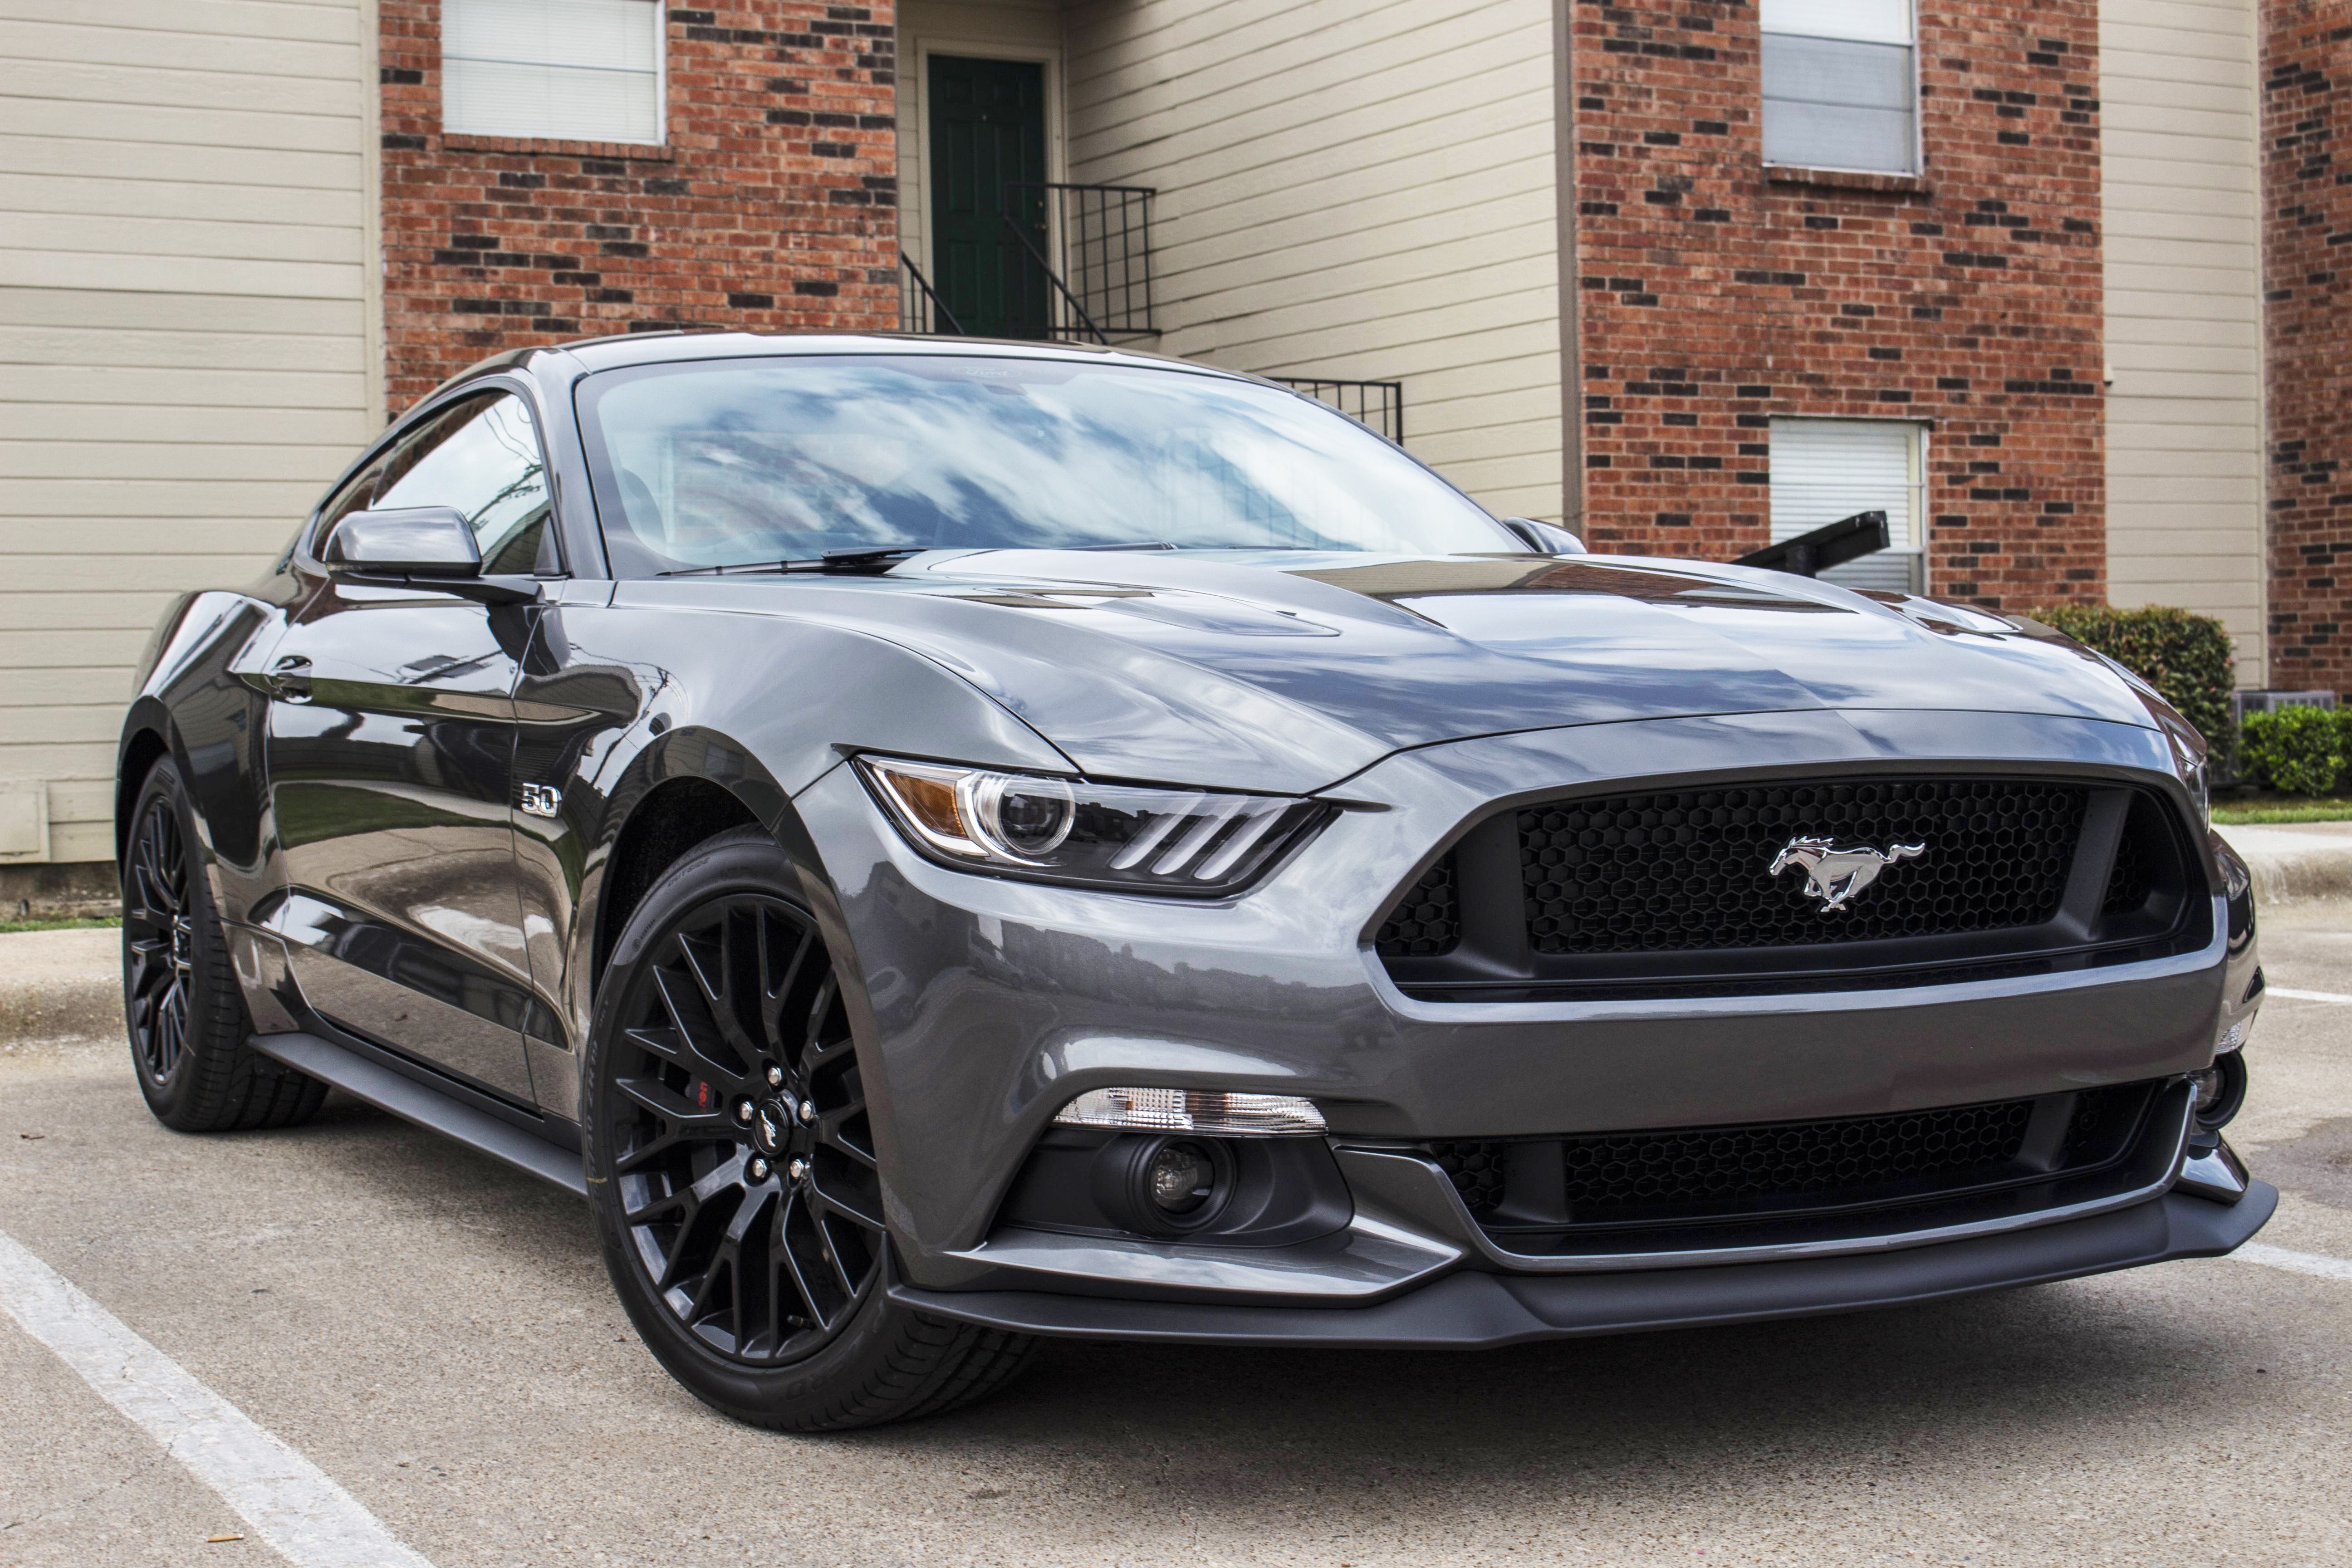 General 5184x3456 car vehicle Ford Ford Mustang muscle cars American cars frontal view Ford Mustang S550 logo gray cars